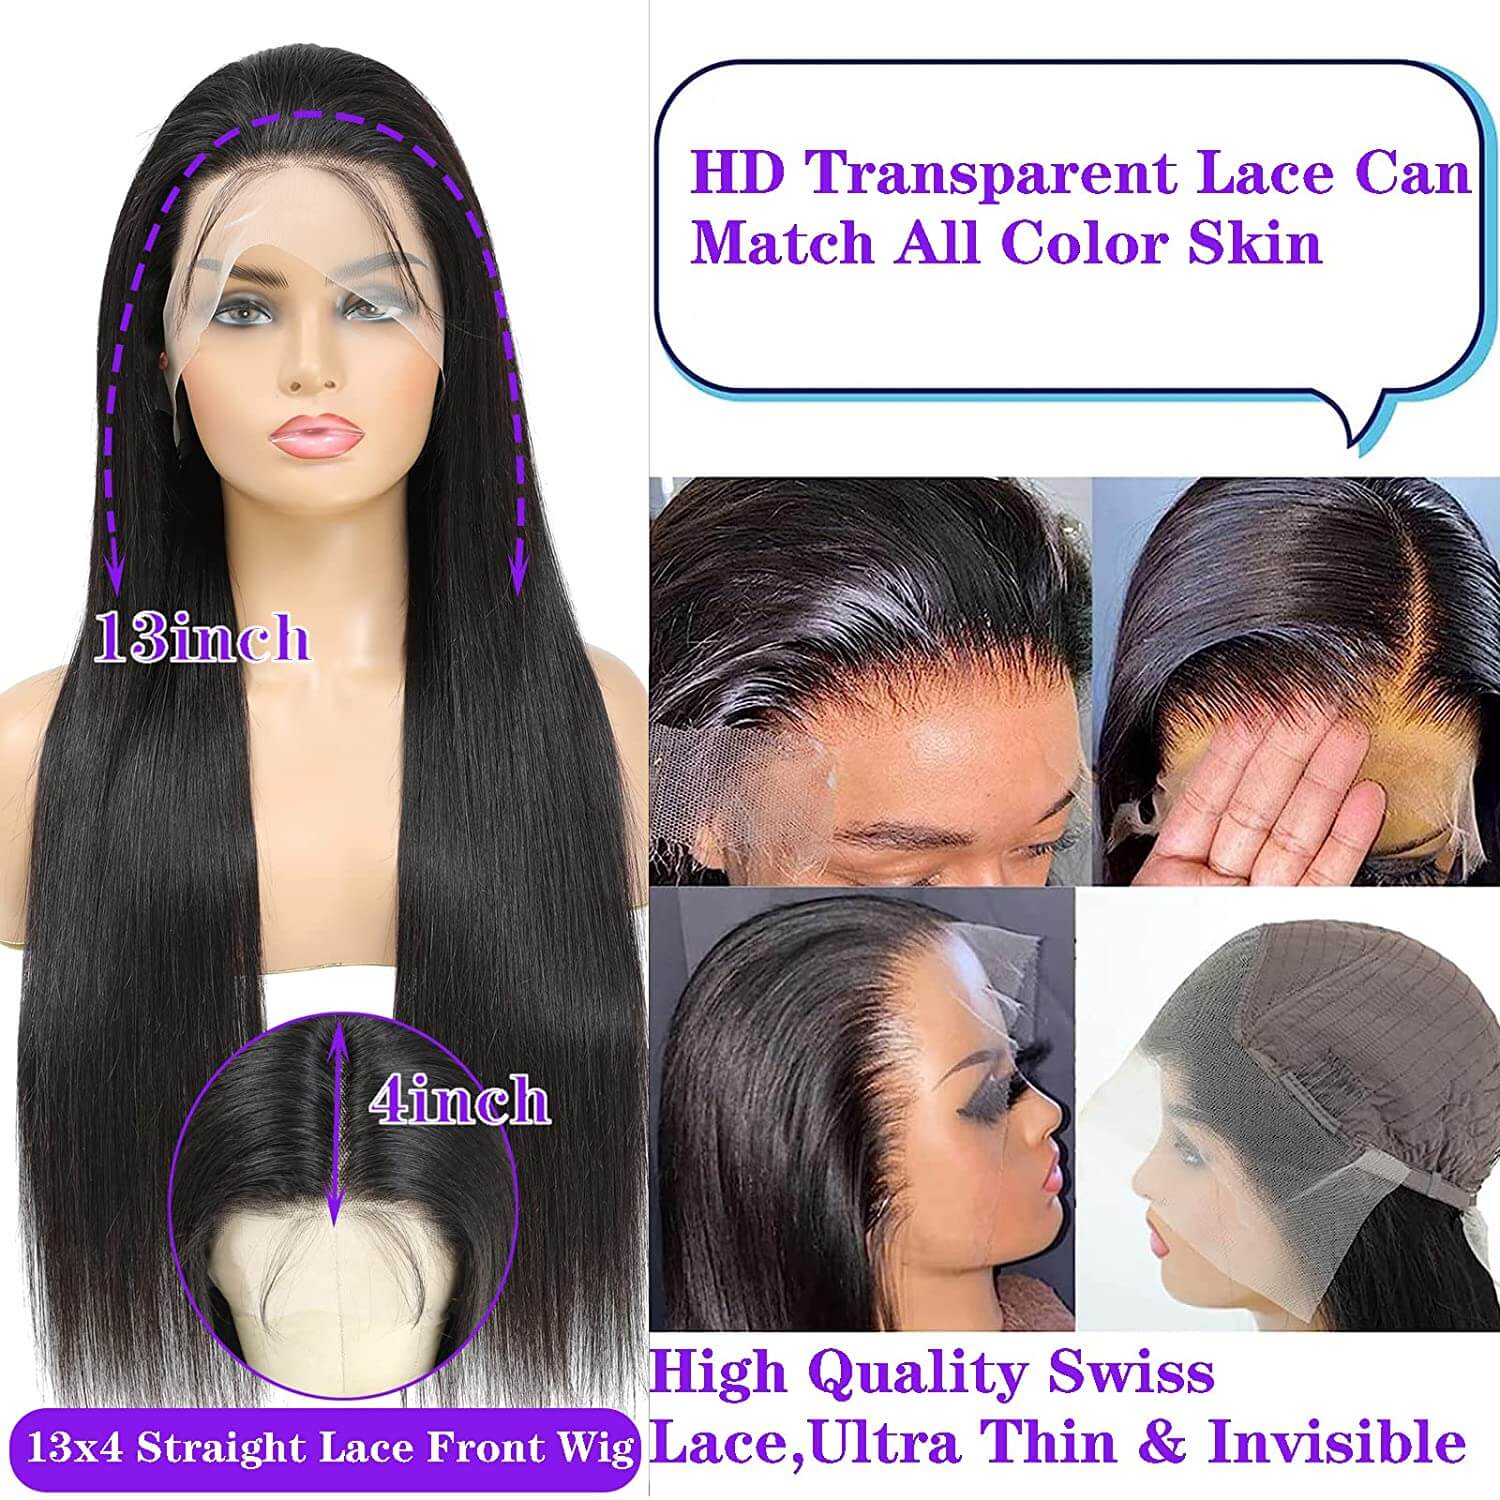 Straight Hair HD Transparent 13x4 Lace Front Wigs Pre Plucked Human Hair Wig Natural Black